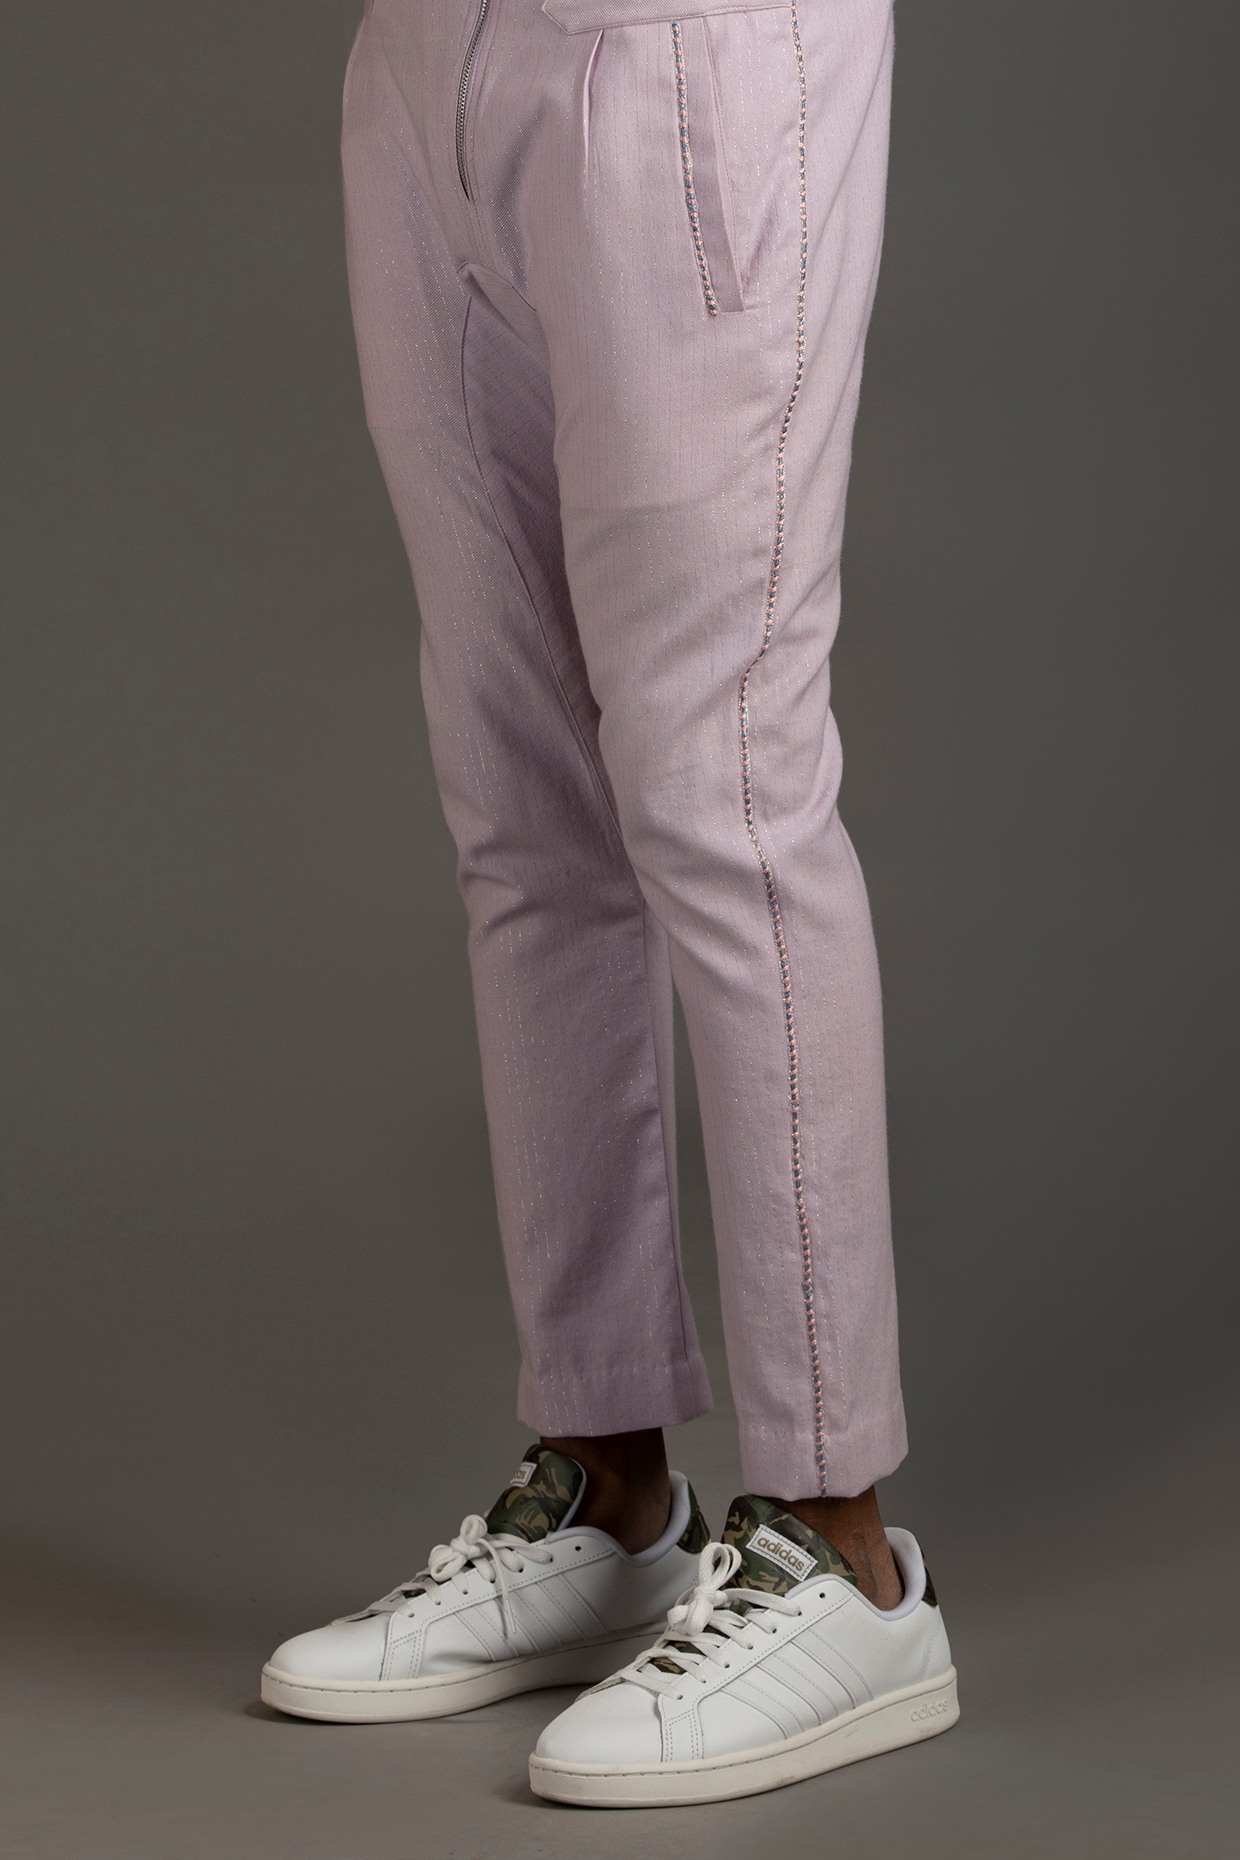 Buy Formal Pants Online In India - Etsy India